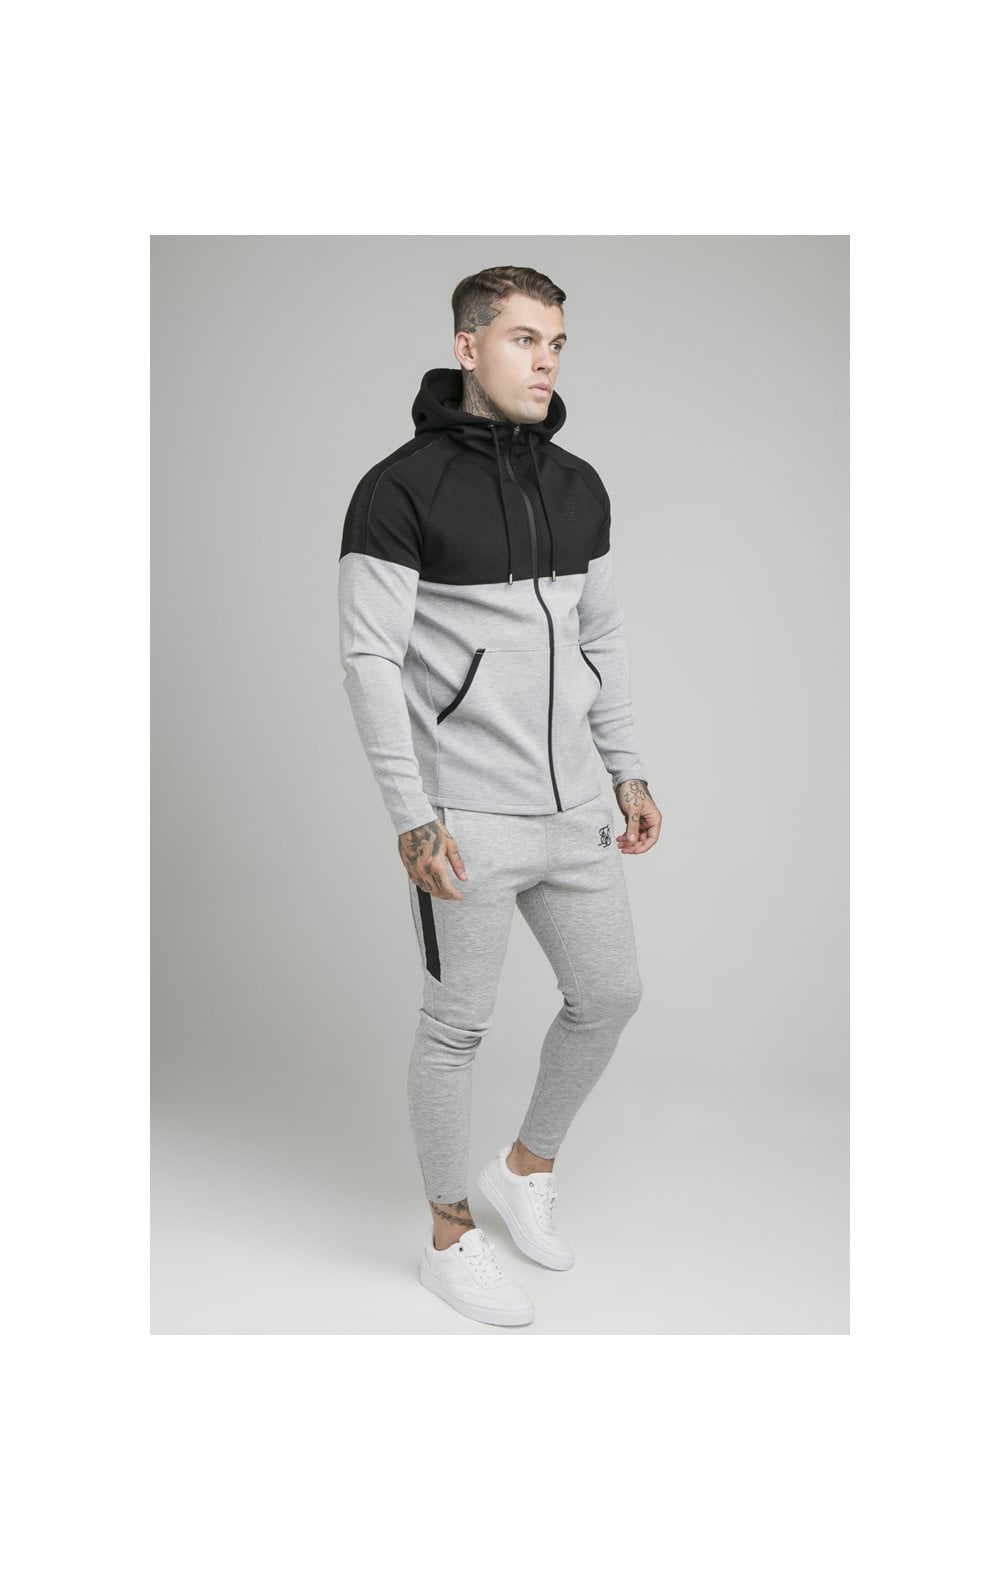 Black Motion Tape Zip Through Hoodie And Jogger Set (4)